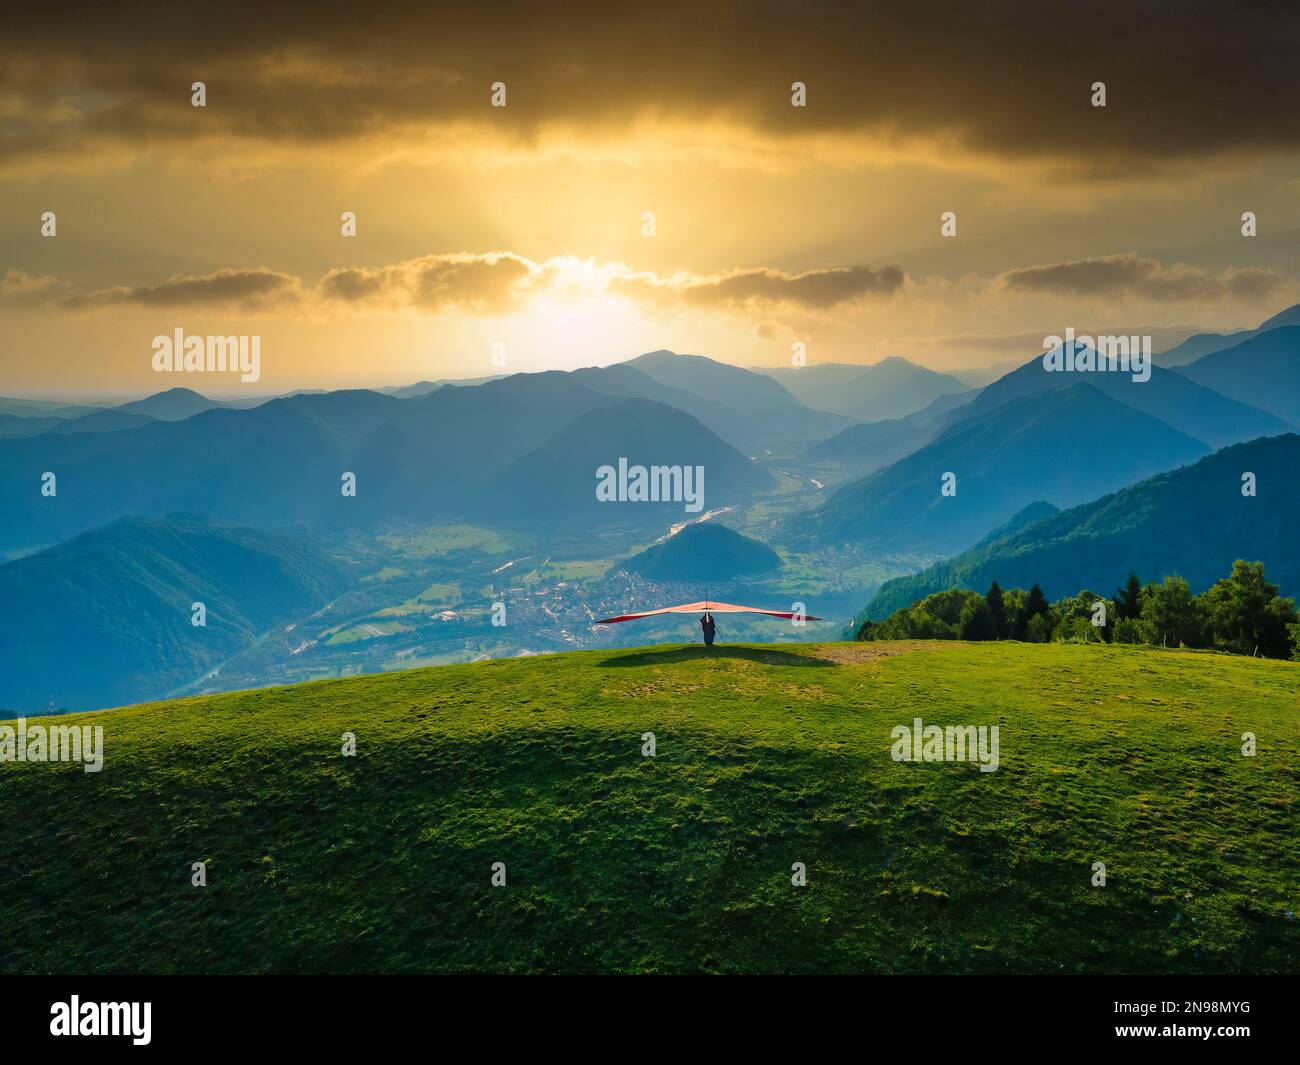 Hang glider ready to launch from the green meadow in the mountains. Amazing scene in Soca valley, outdoor sport paradise in Slovenia, Europe Stock Photo